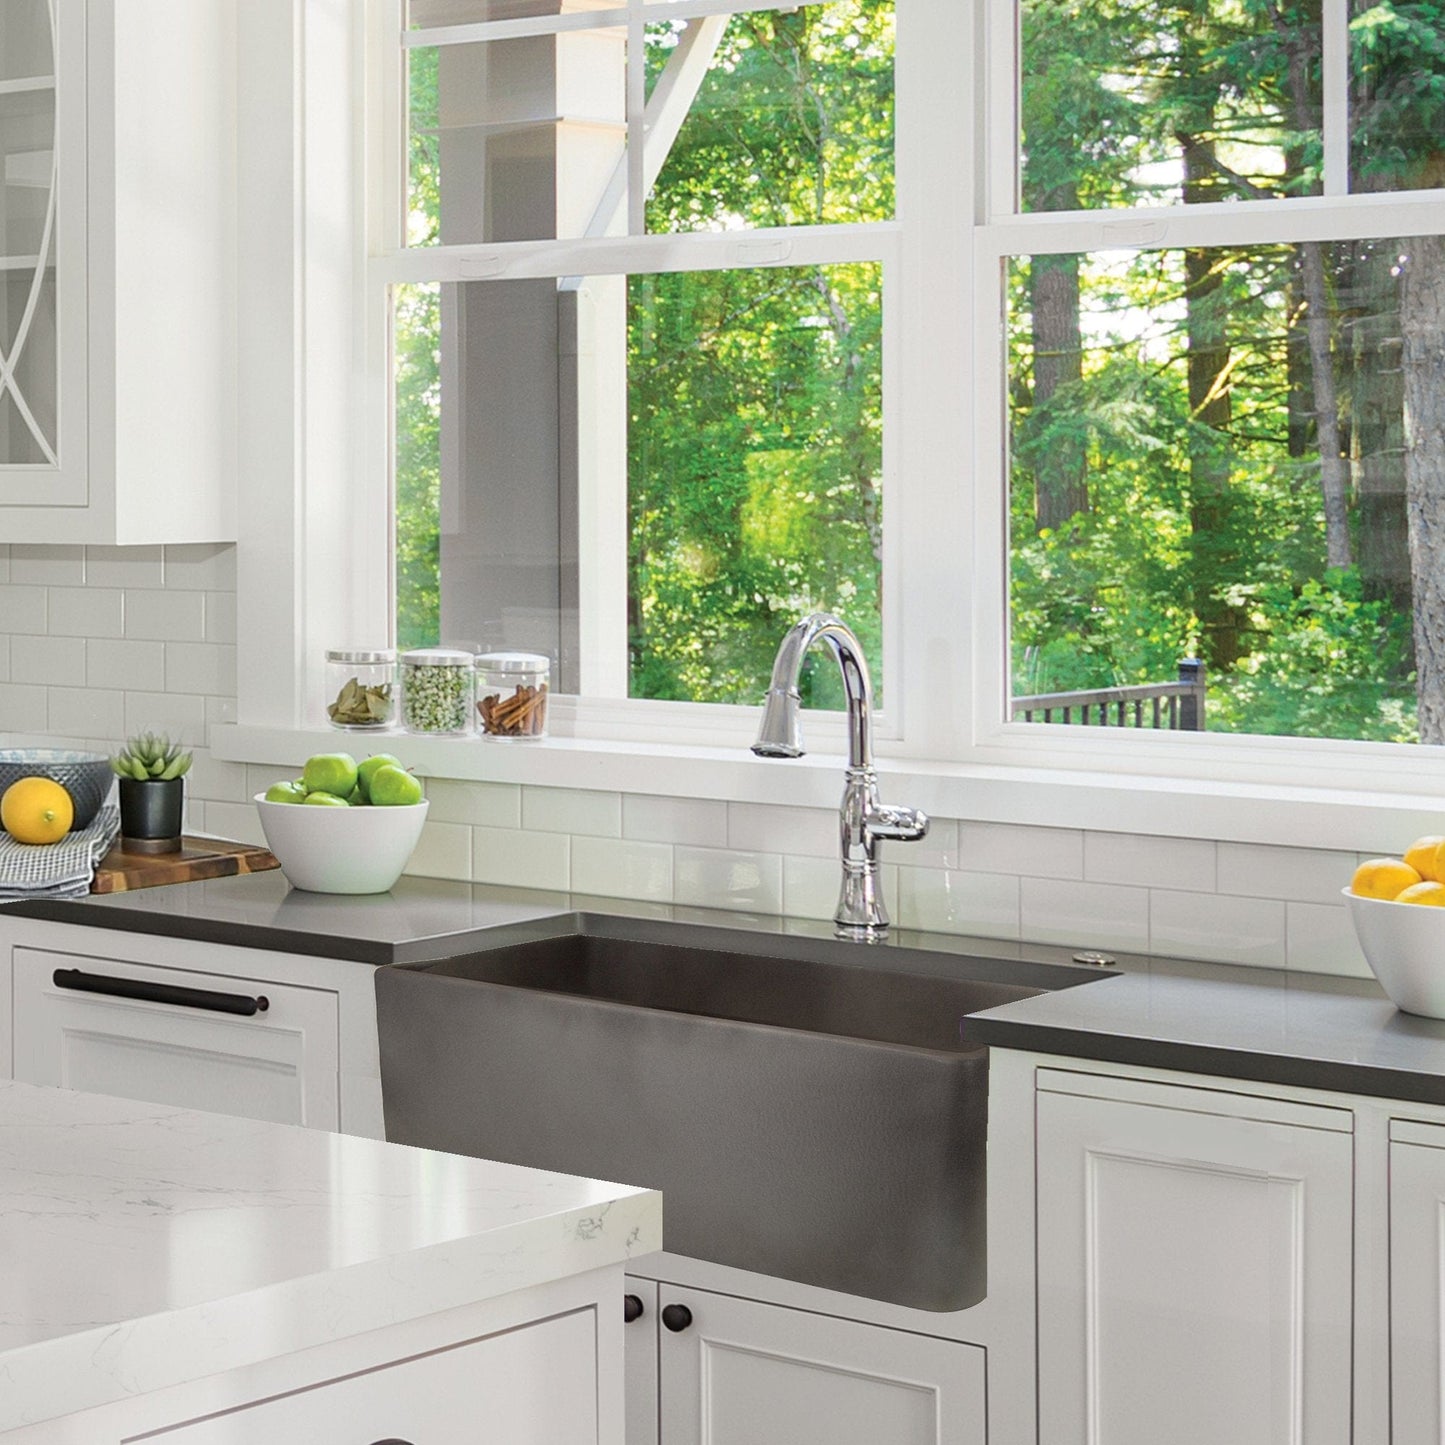 Nantucket 30" Farmhouse Fireclay Sink with Concrete Finish - FCFS3020S-Concrete - Manor House Sinks